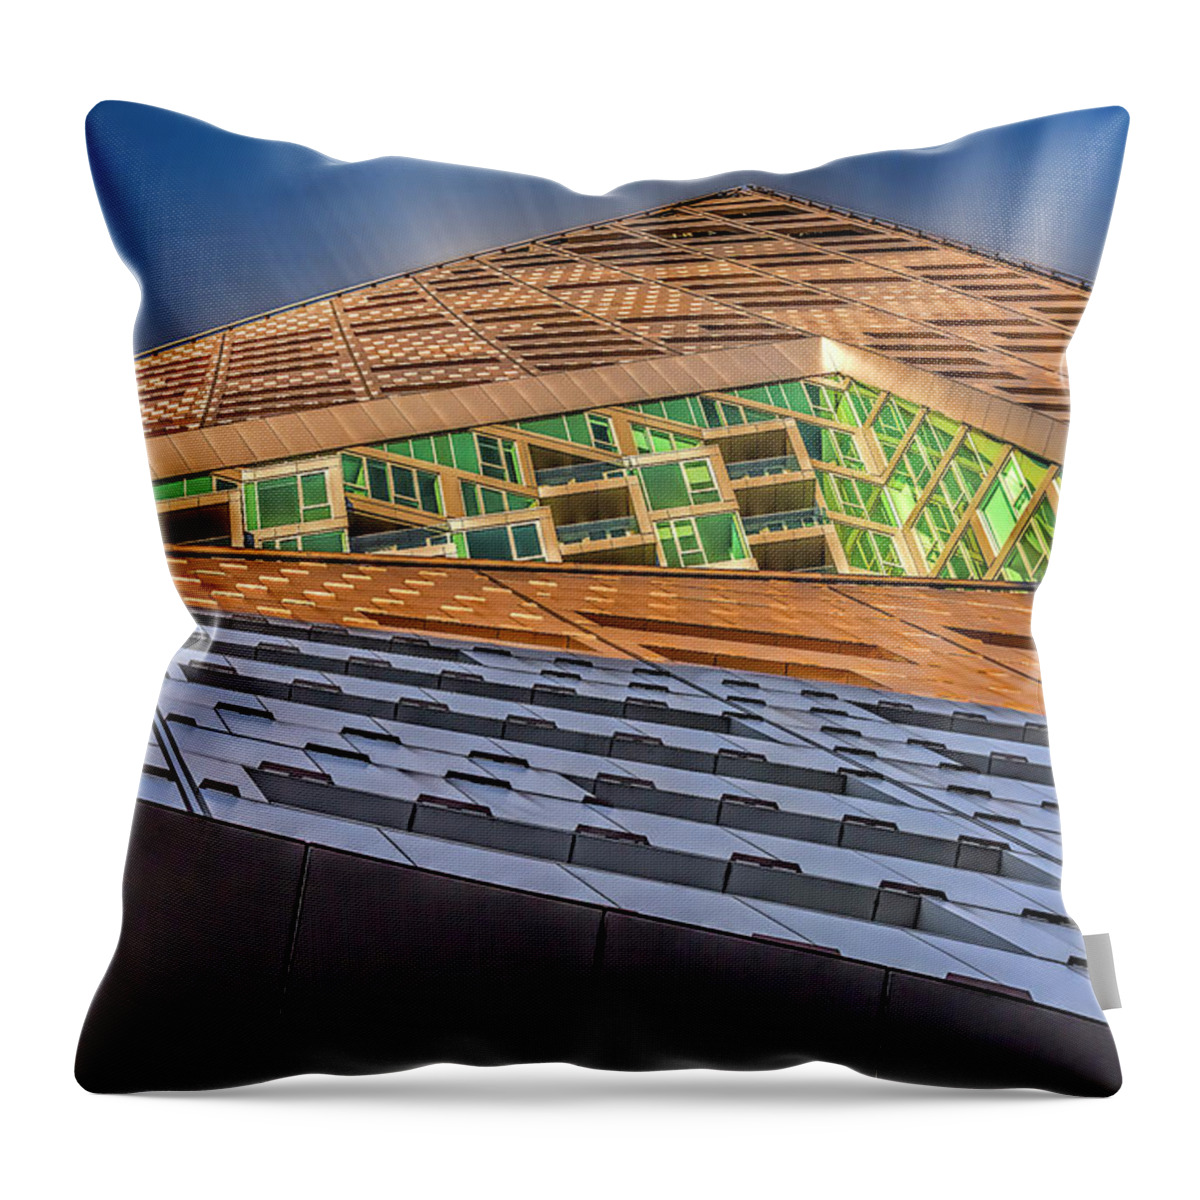 Via 57 West Throw Pillow featuring the photograph NYC West 57 ST Pyramid by Susan Candelario